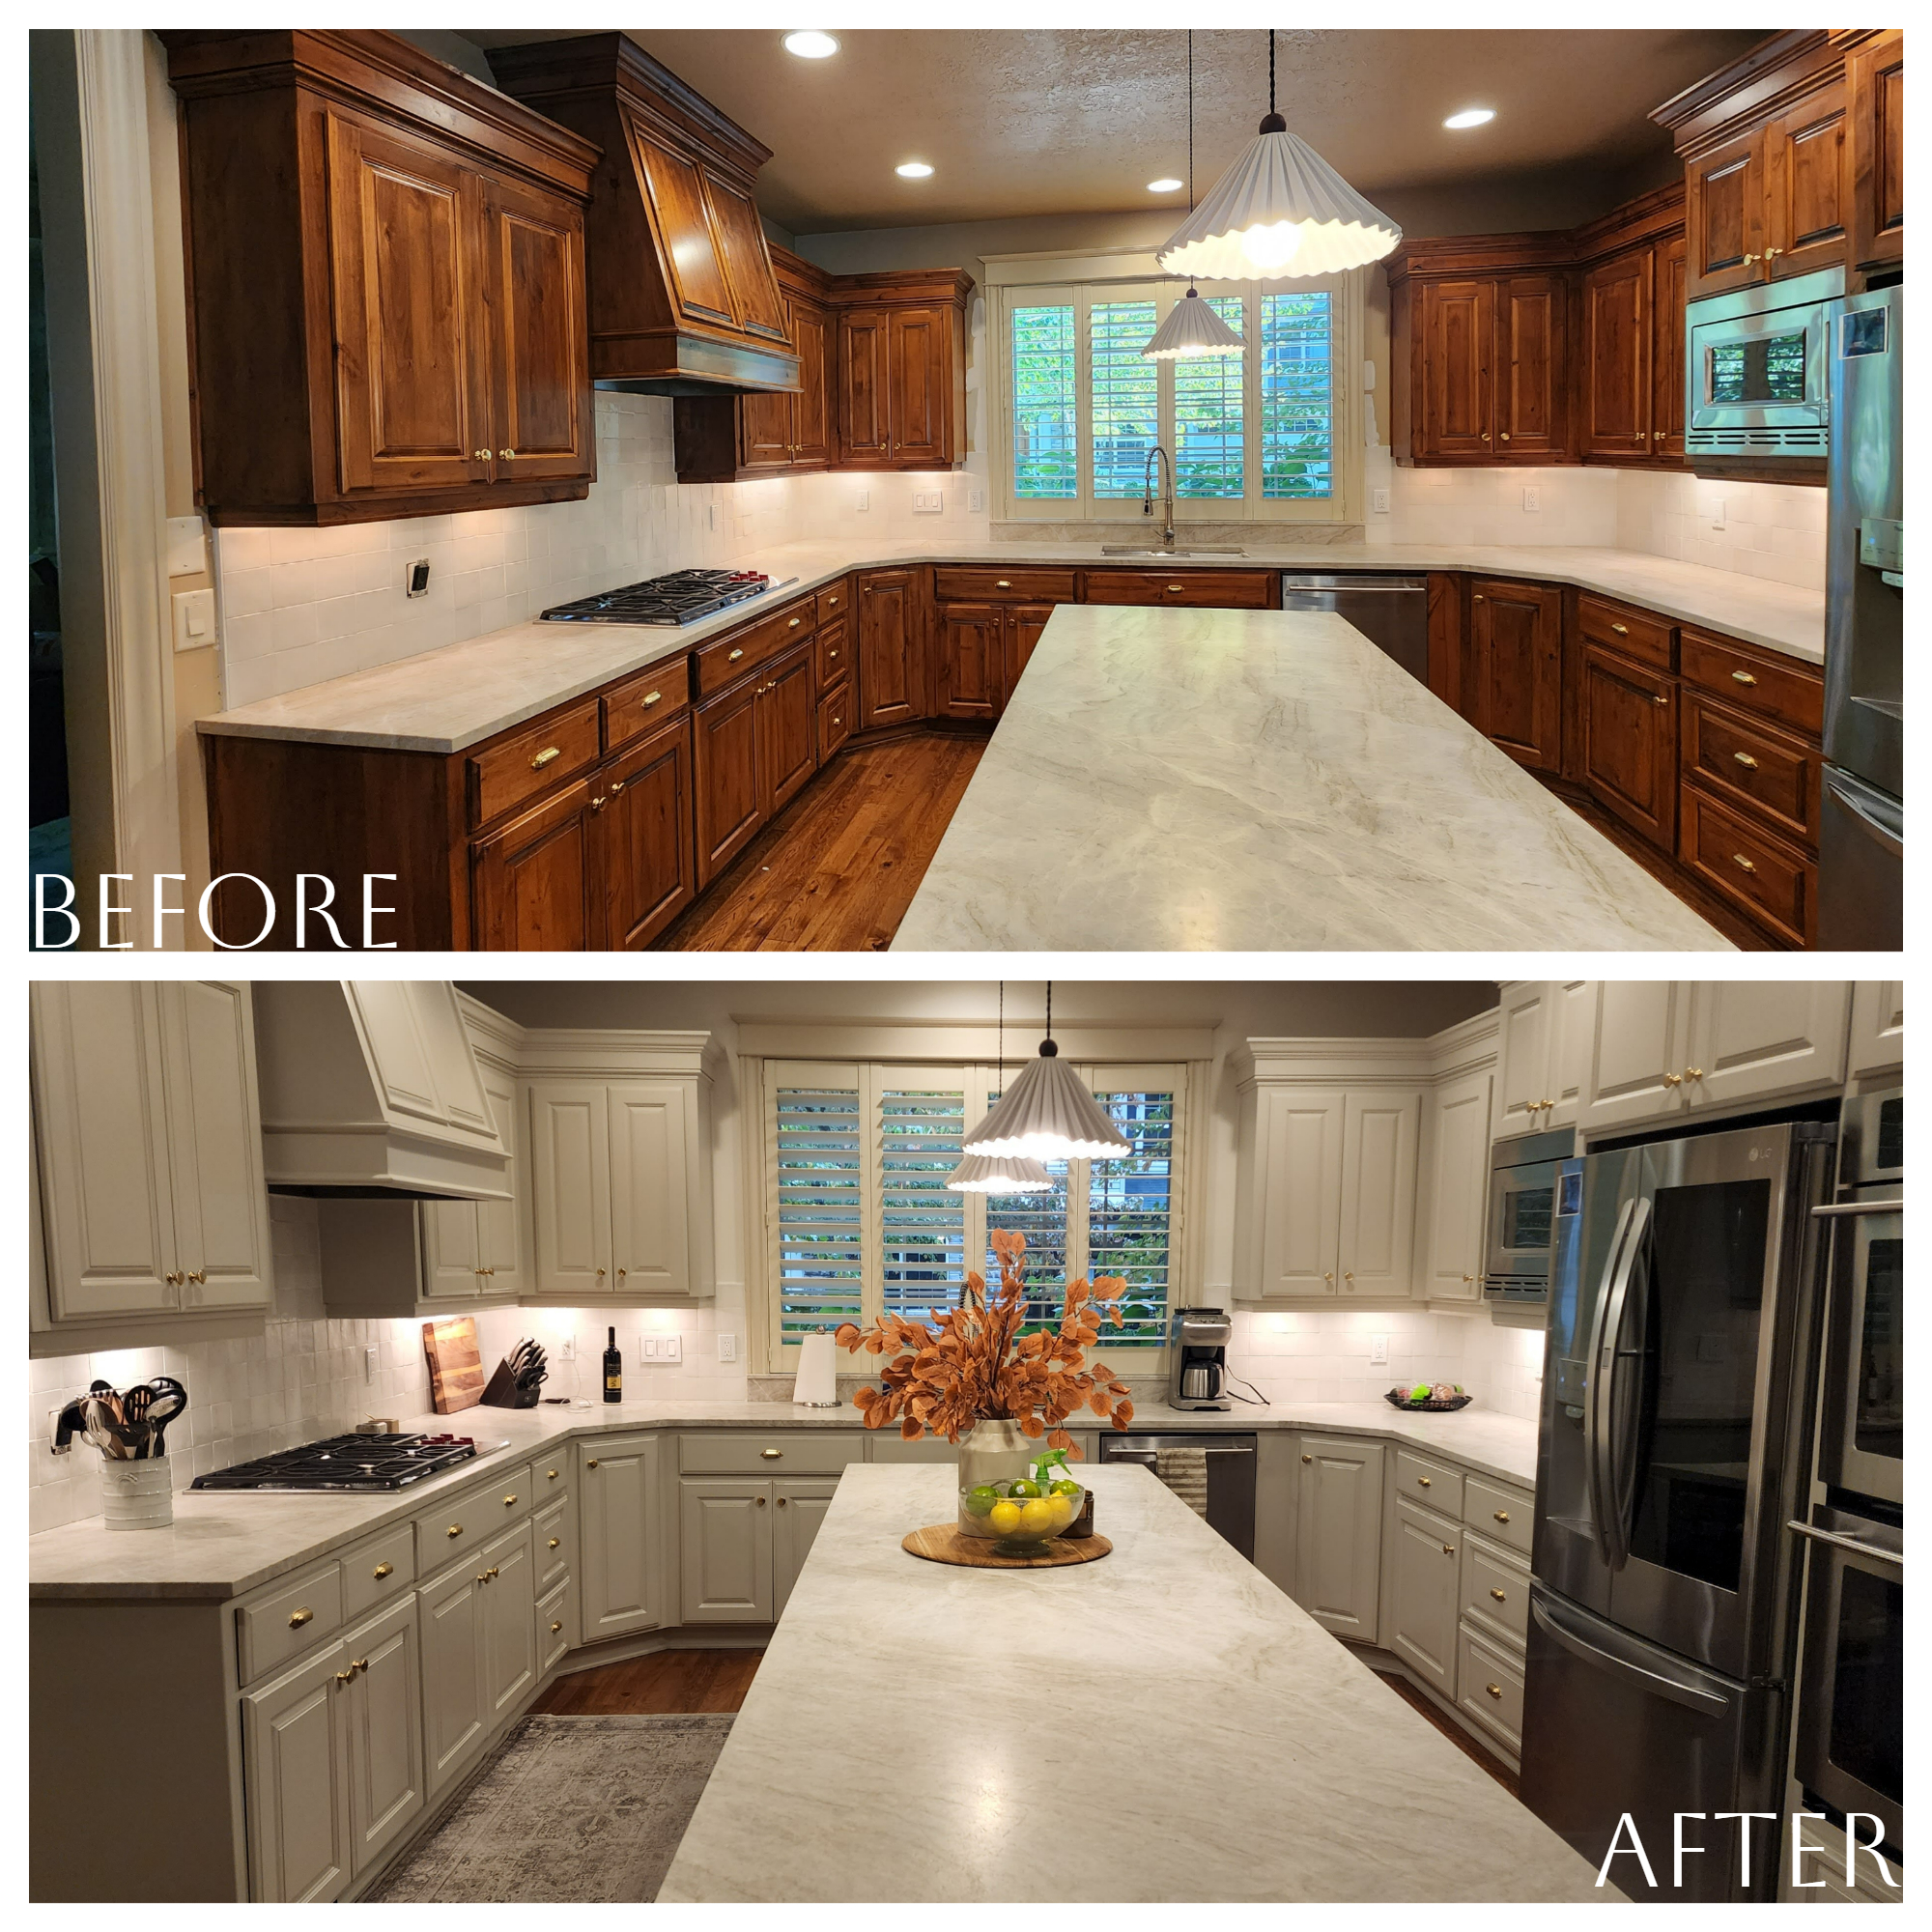 Before and after pictures showcasing the indoor elegance of a holiday-ready kitchen.